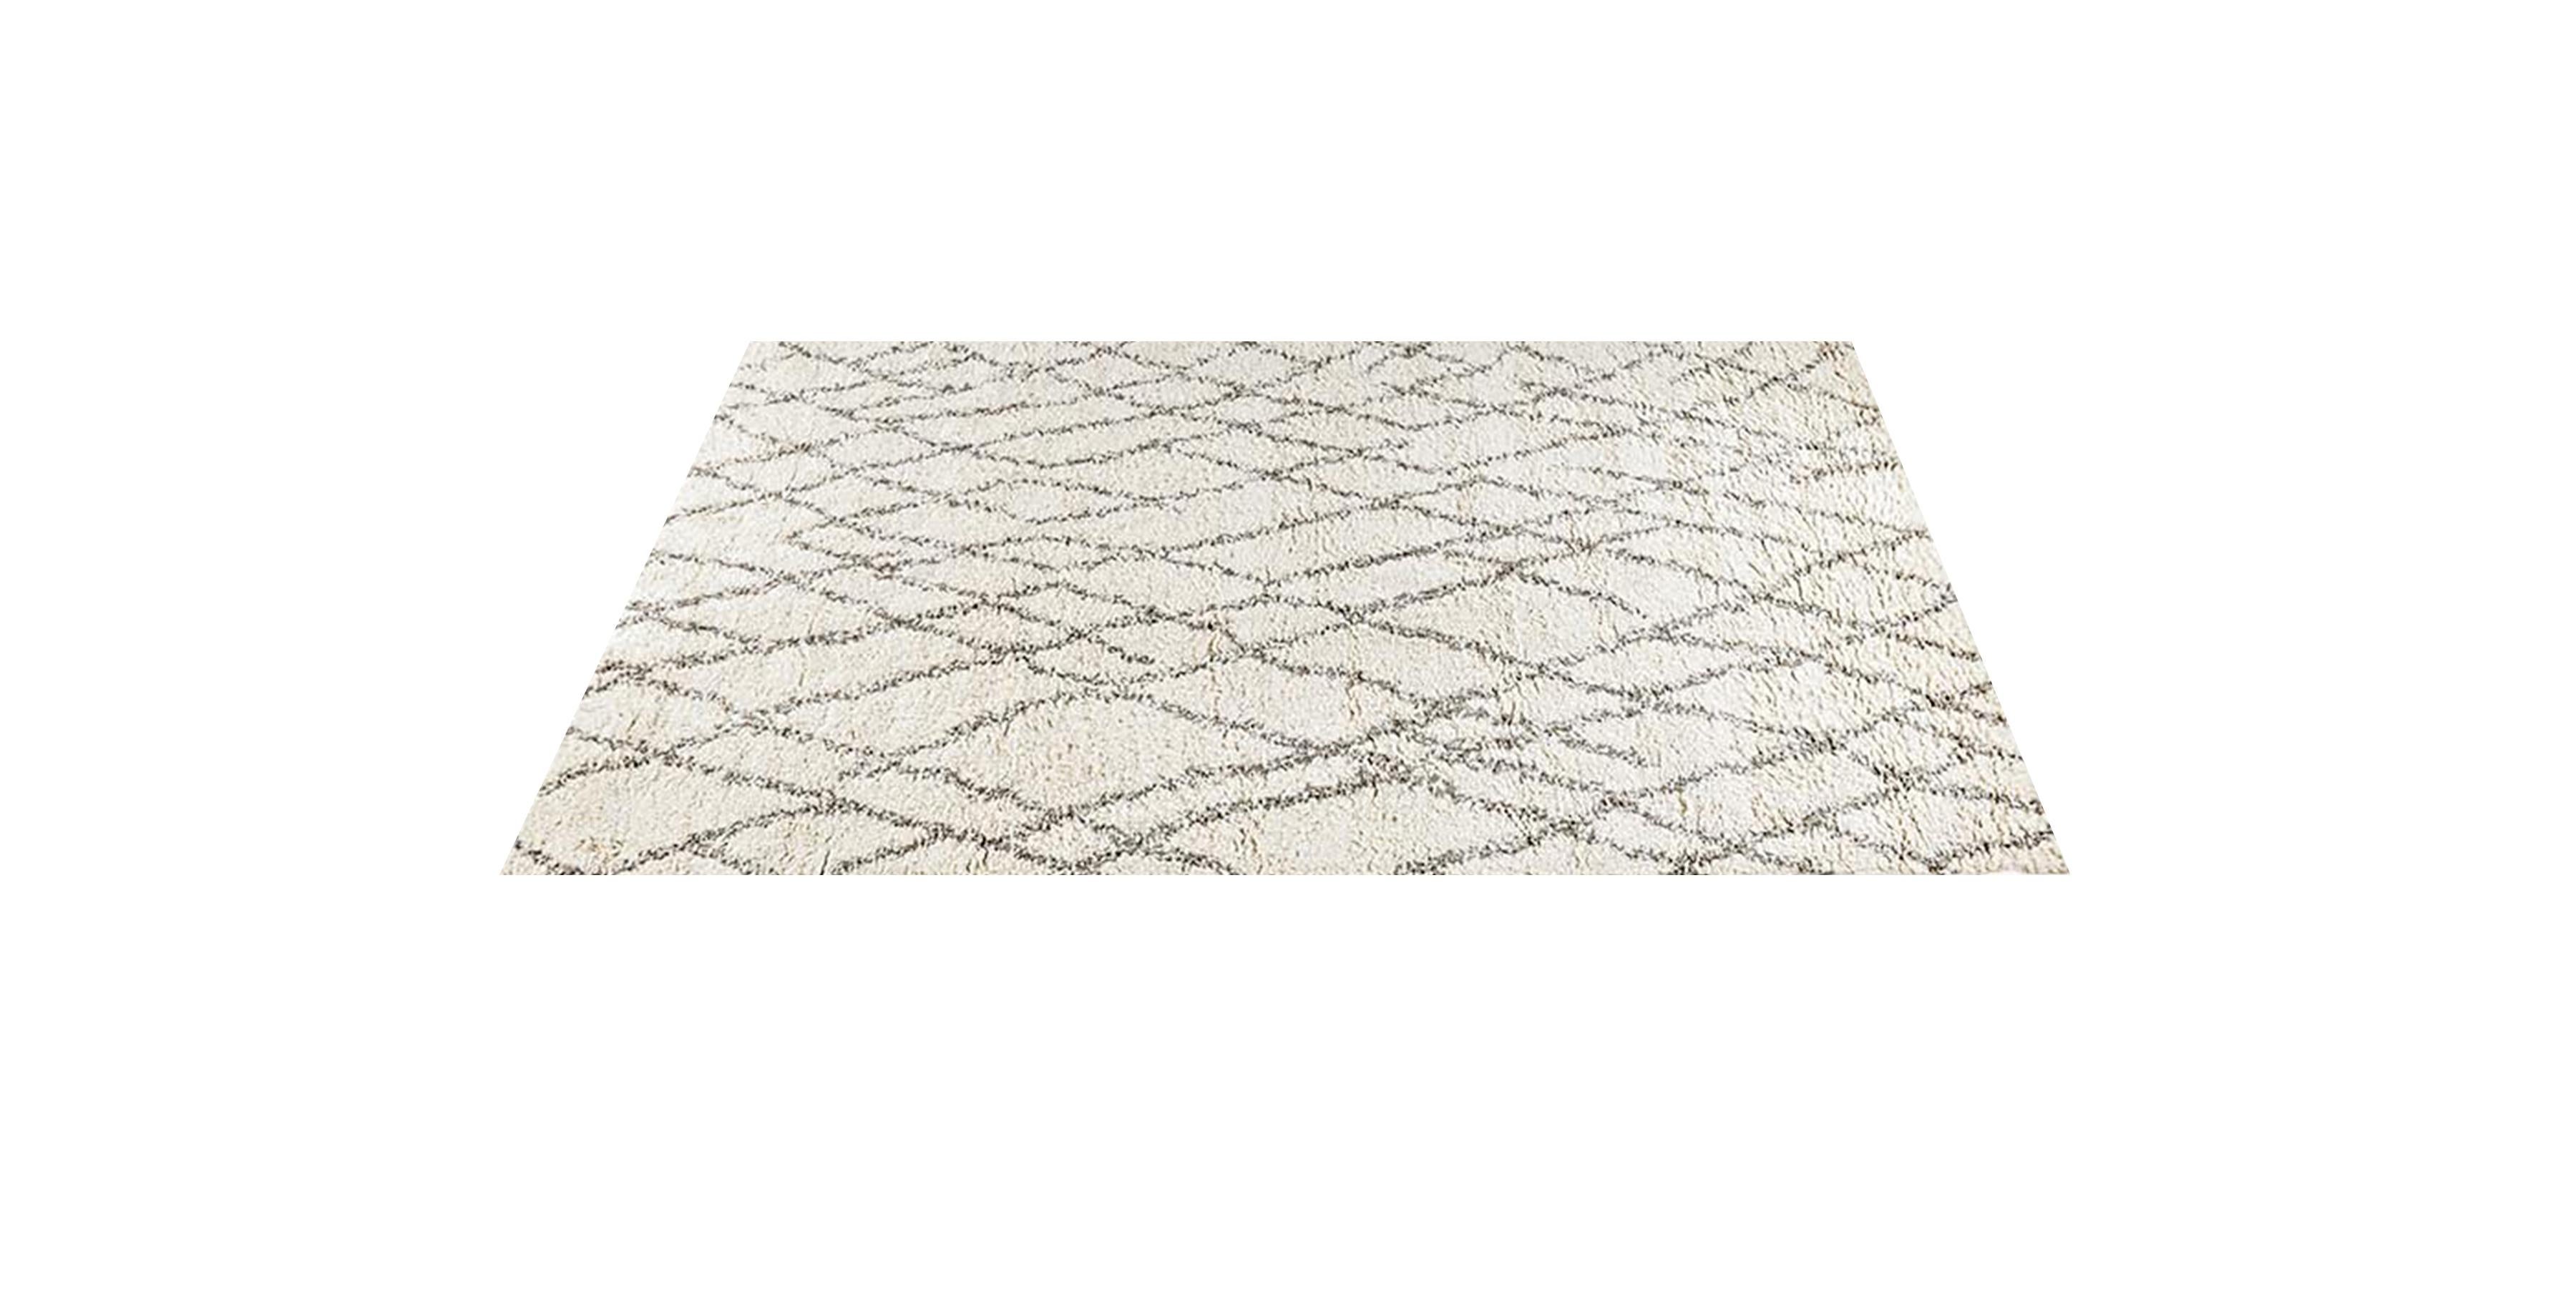 Hand knotted by master artisans from ultra-plush wool, our rug is sheared to a sumptuous, extra-long pile. The distinctive design‚ sketched diamonds on a naturally multi-toned background. Brings a sophisticated energy to any space. Ben is inspired